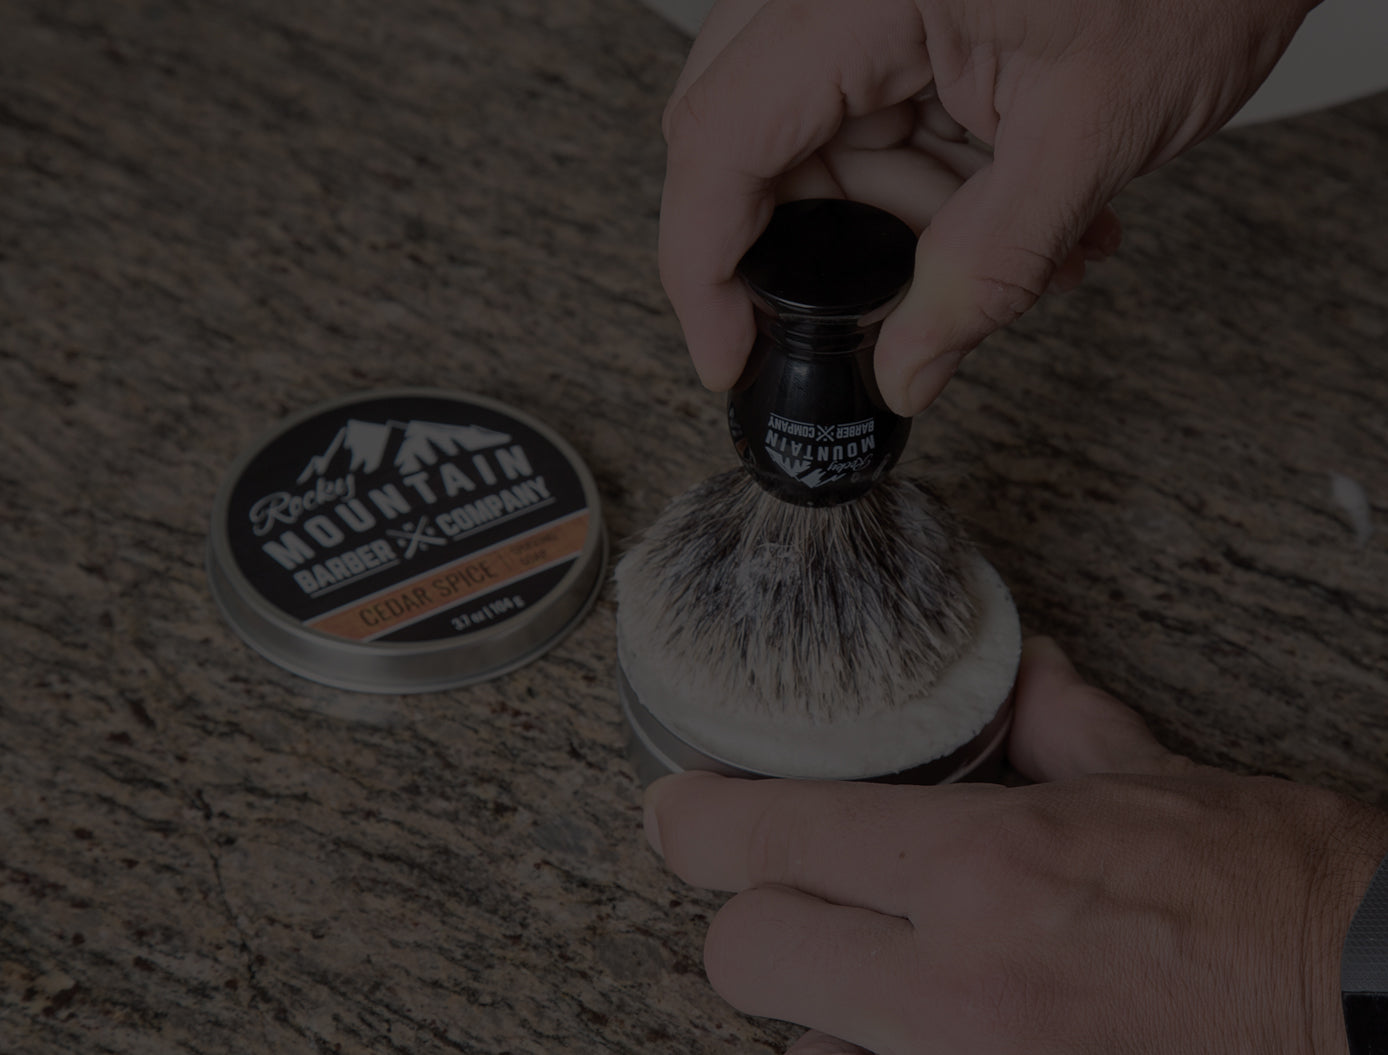 Men's Shave Gel - Clear Shaving Gel So You Can See Where You Are Shaving –  For Full Shaves and Tightening Beard Lines - 8oz by Rocky Mountain Barber  Company : 